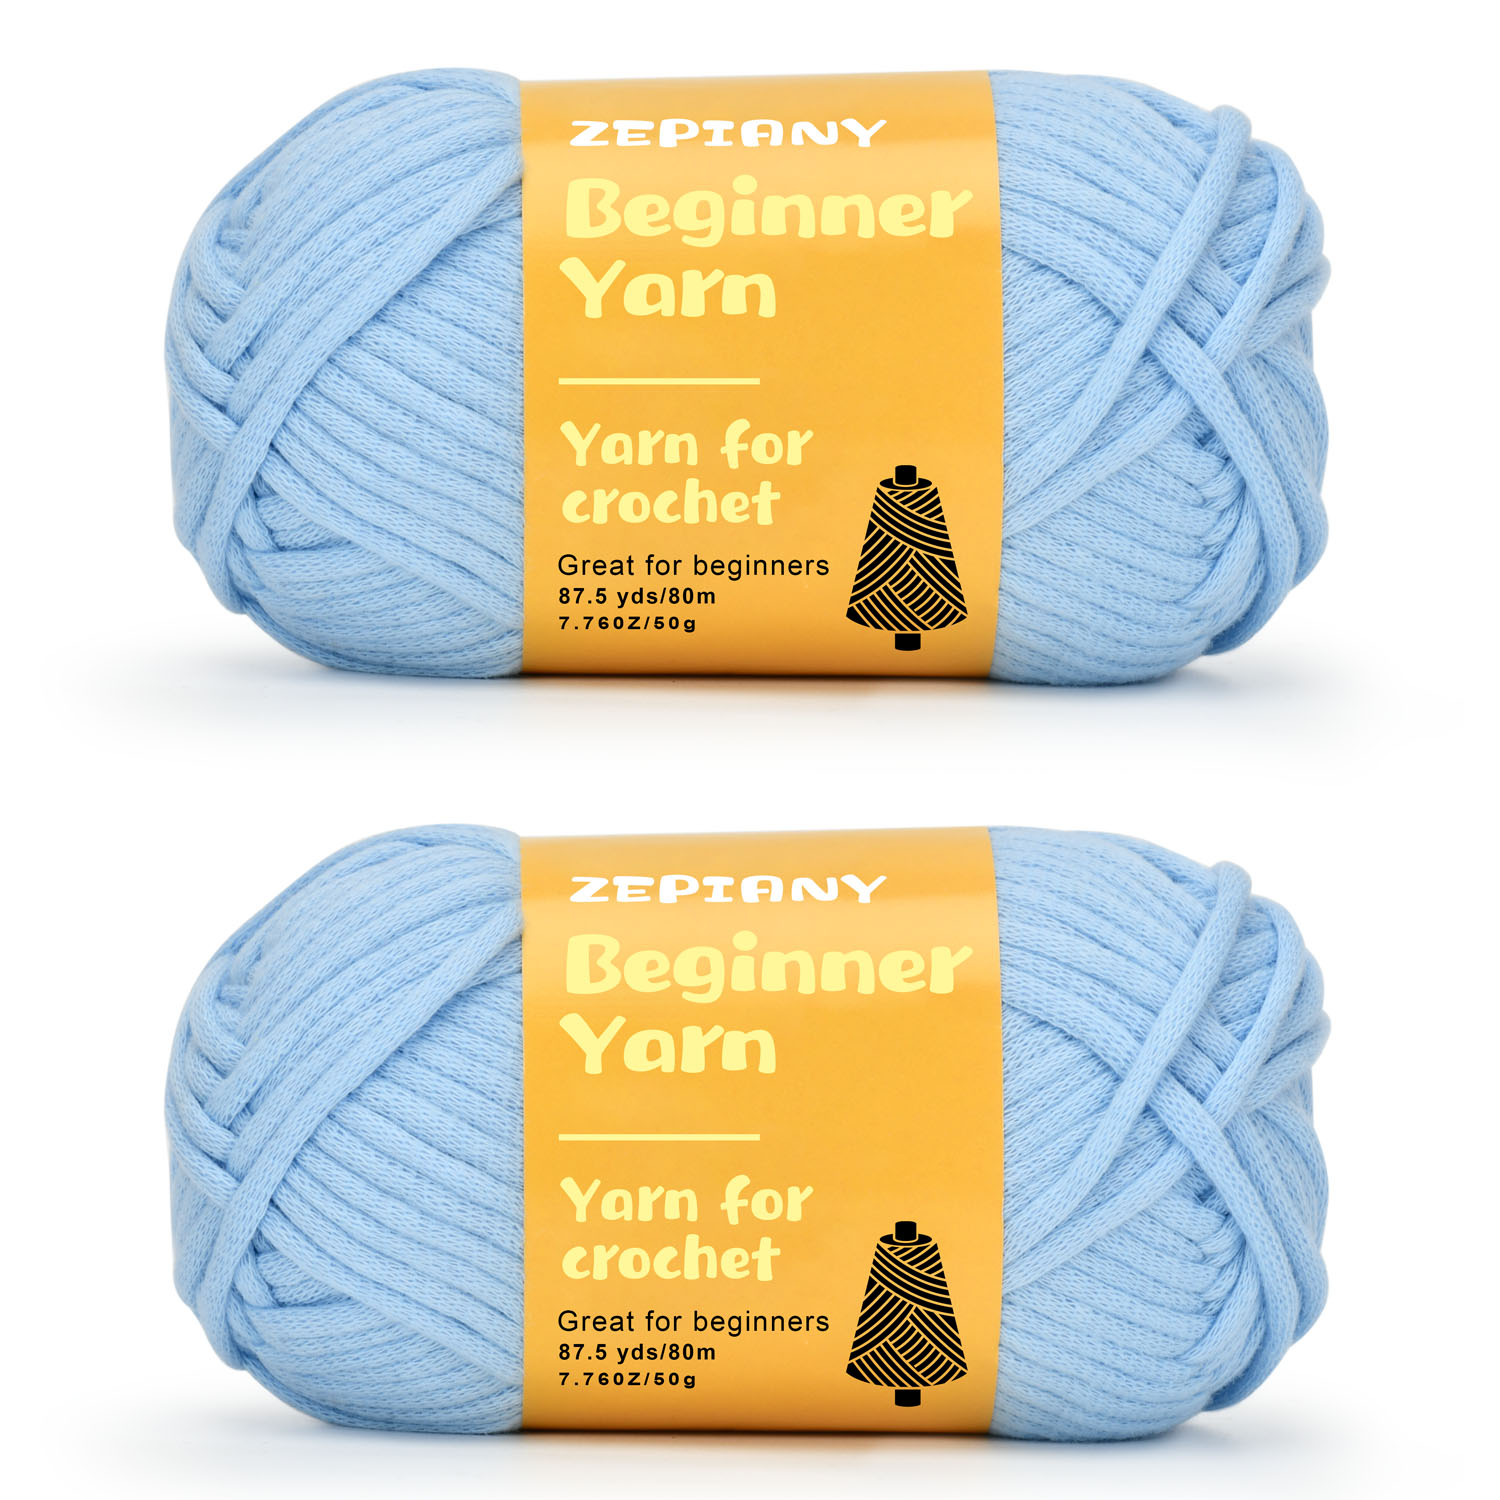 Yarn for Crocheting and Knitting for Beginners with Easy-to-See Stitches,  2PCS Cotton Nylon Blended Yarn, 2x80m (87.5yds) Pefect for Knitting or